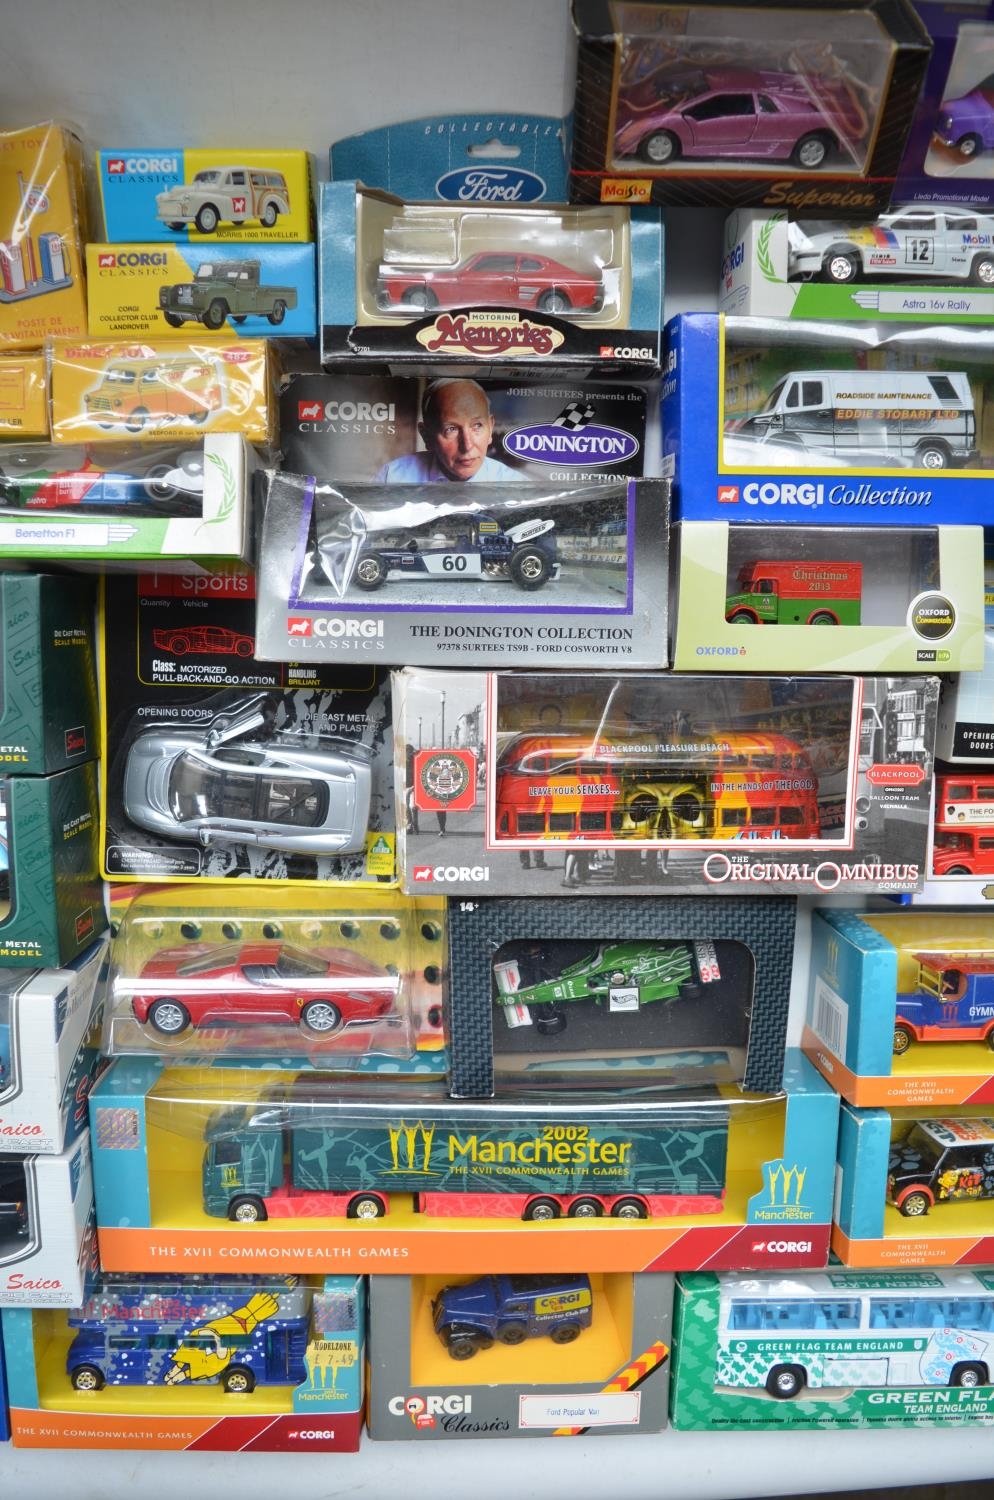 Collection of diecast model cars, various manufacturers and scales incl. Corgi, Maisto, Saico, - Image 3 of 7